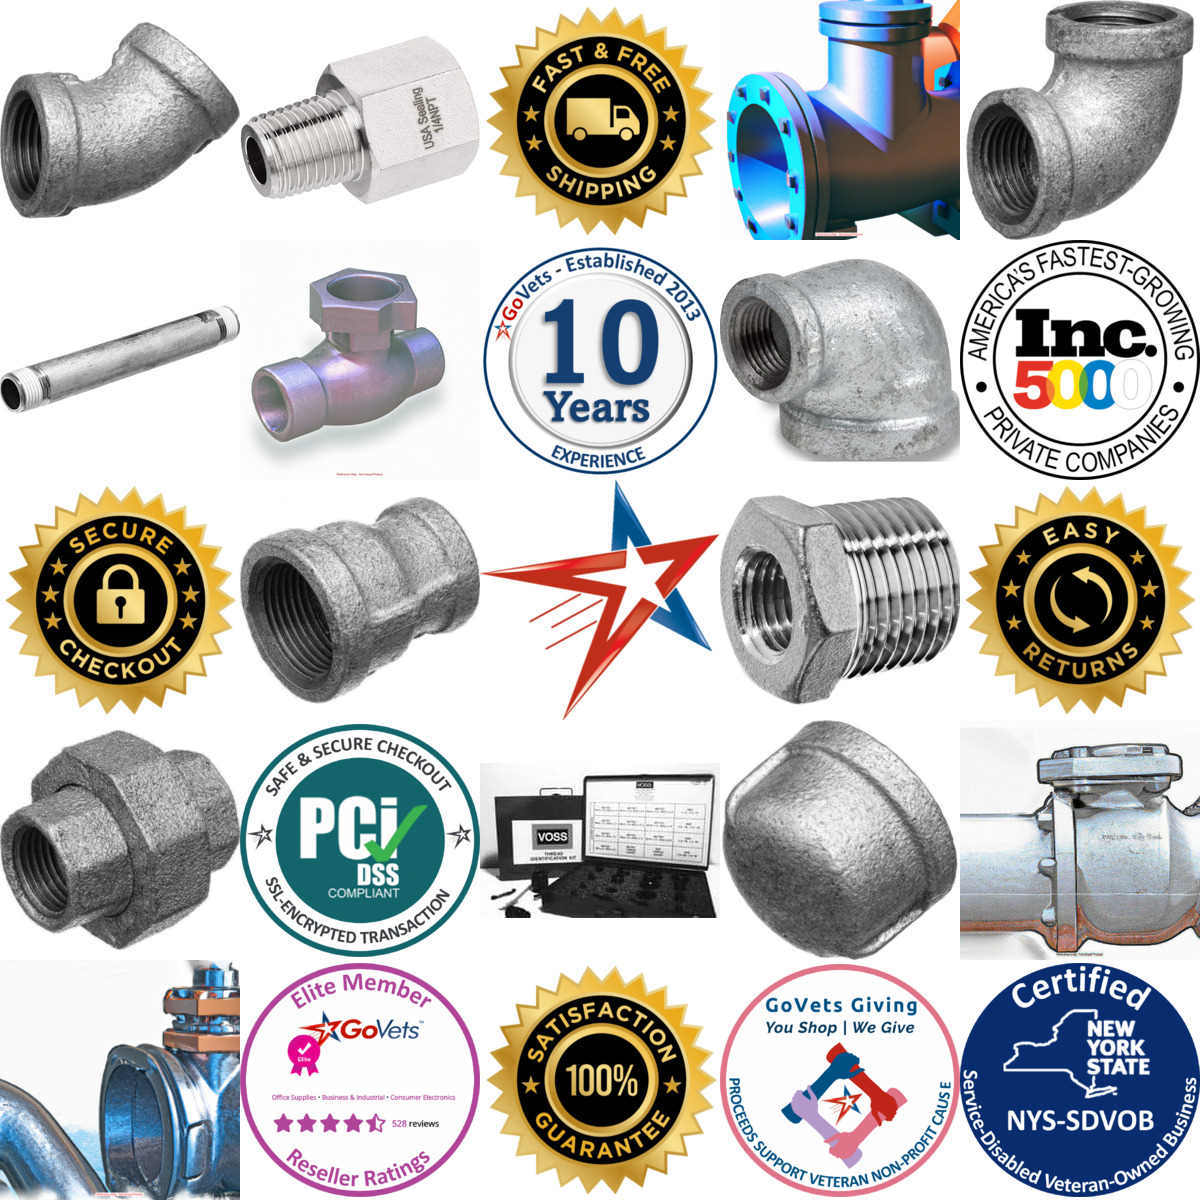 A selection of Ball Valves products on GoVets